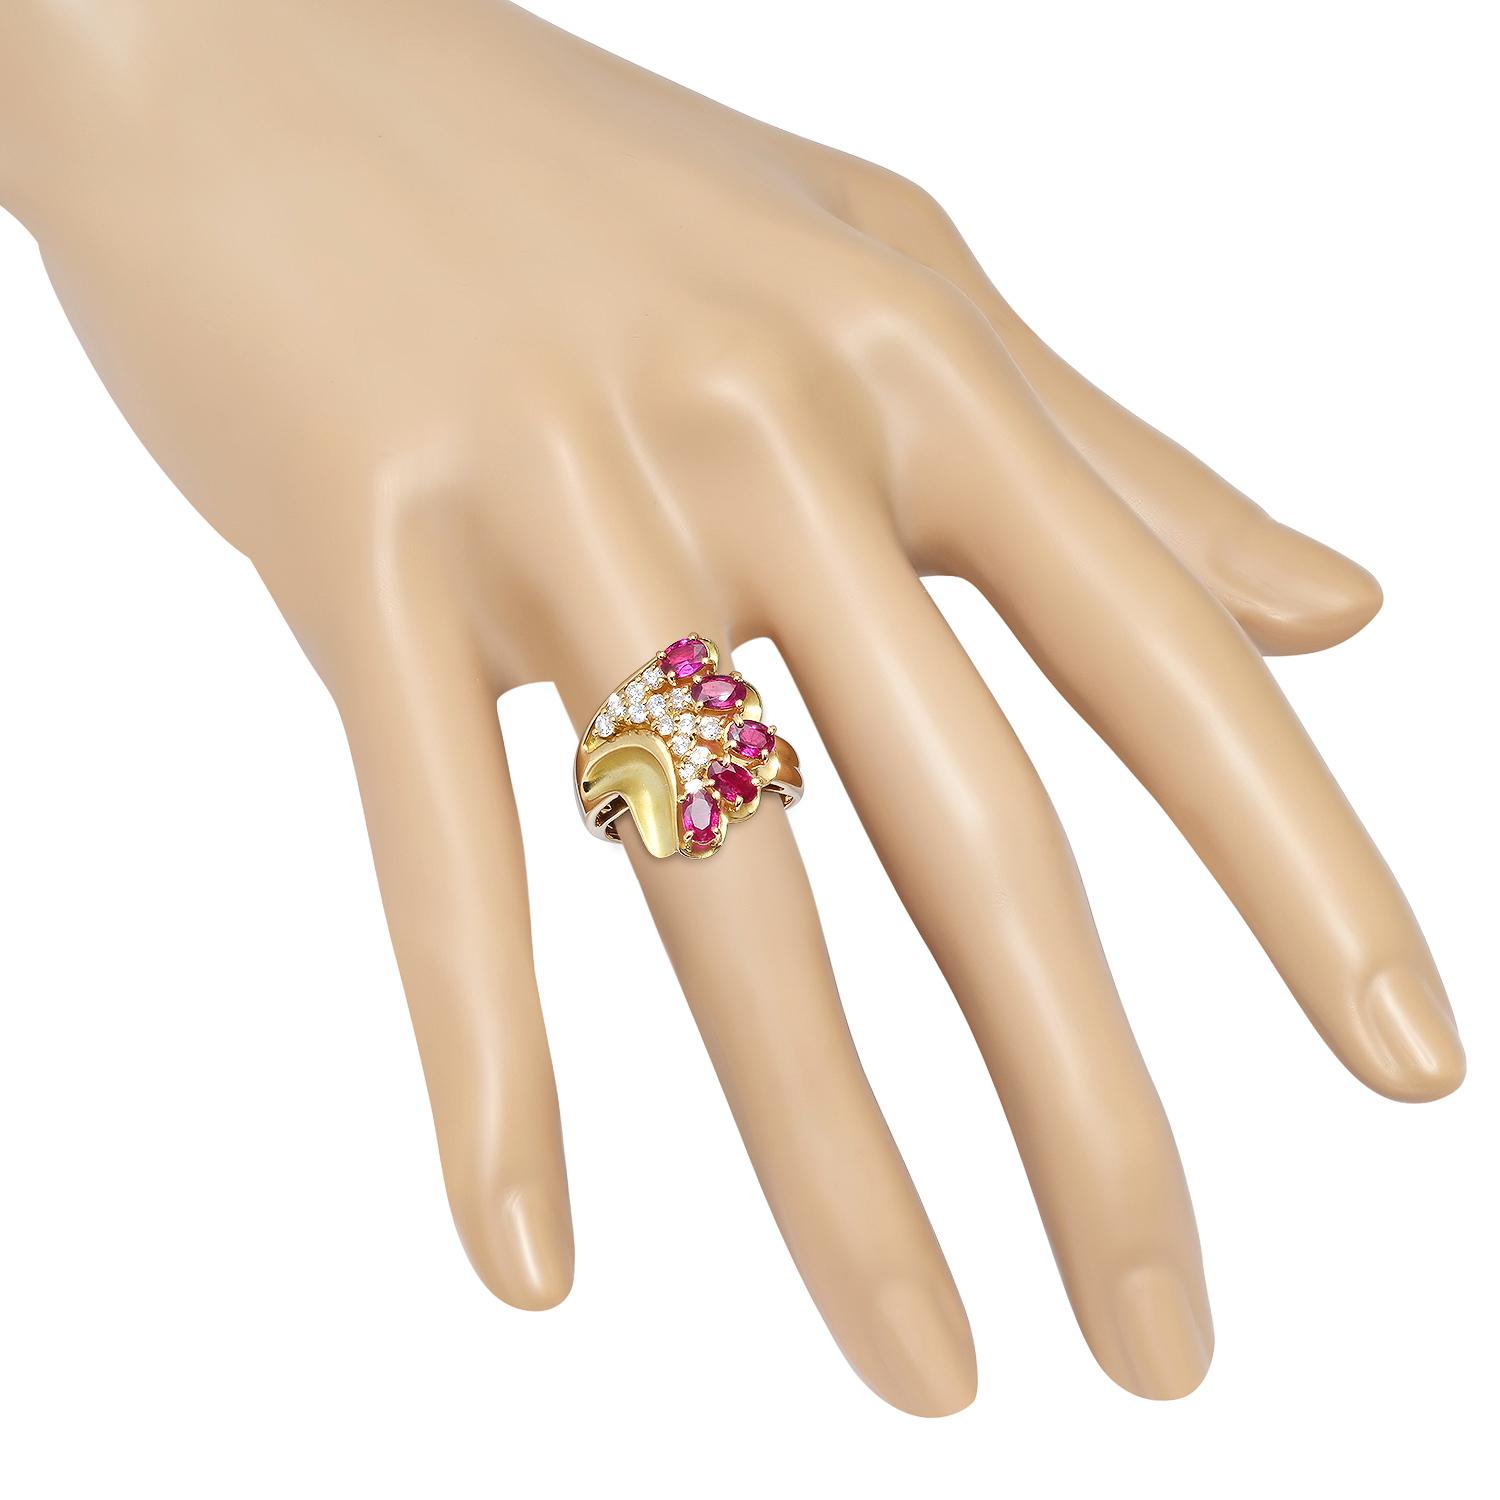 18K Yellow Gold Setting with 1.54ct Ruby and 0.40ct Diamond Ladies Ring